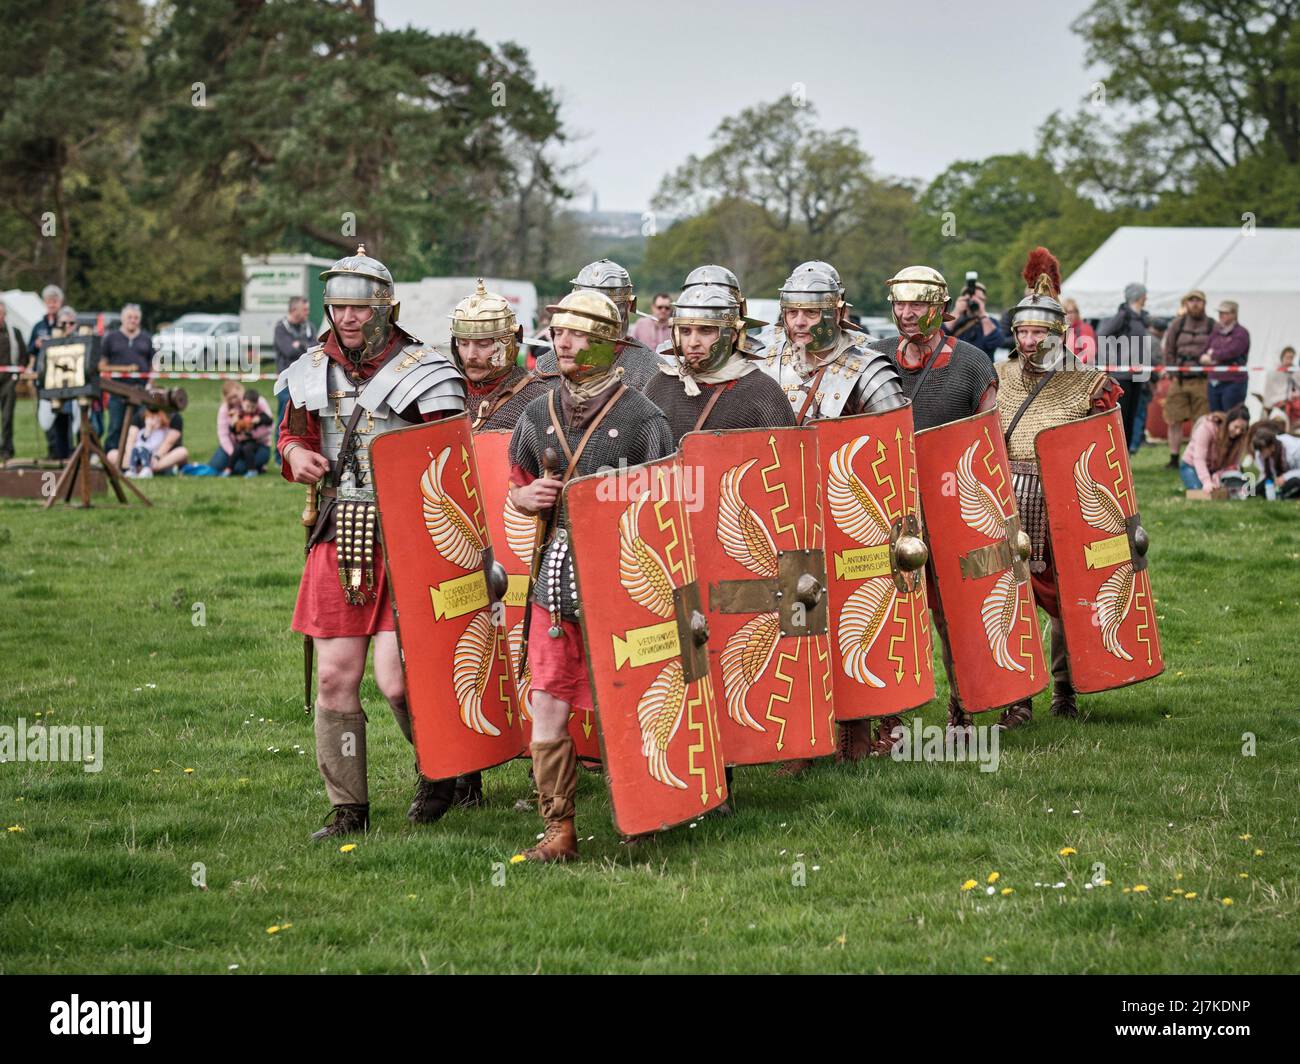 Roman legionaries of the Legion VIII demonstrate marching drills in the arena at the No Man's Land Event at Bodrhyddan Hall, Wales Stock Photo